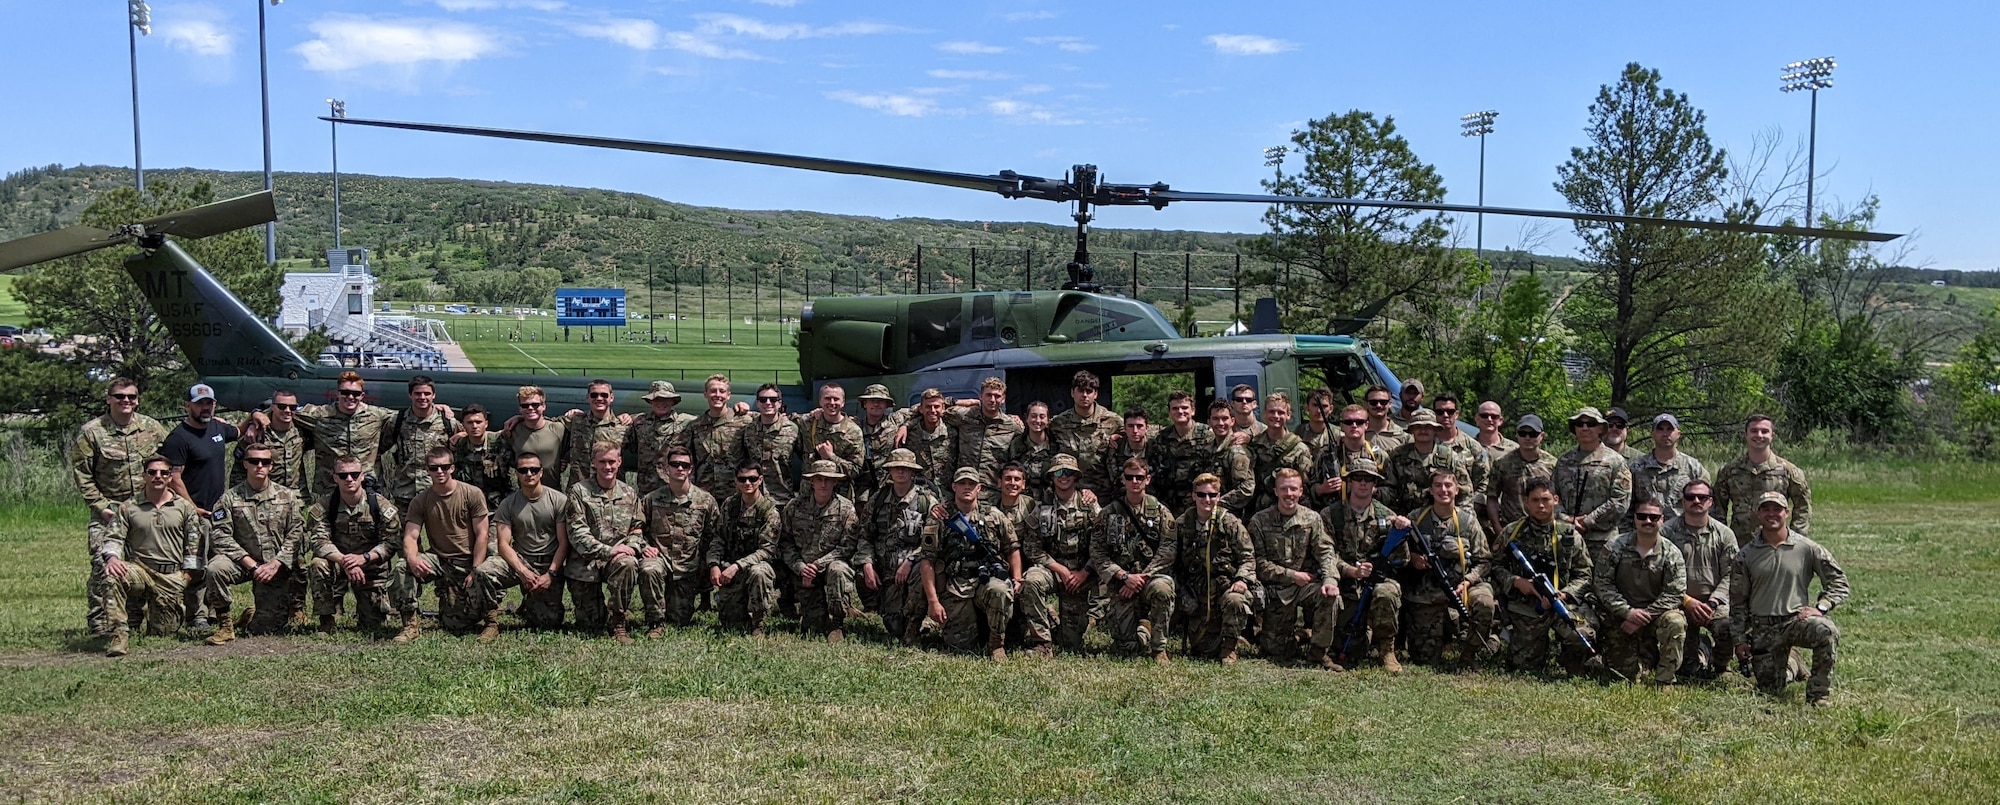 cadets infiltrate and exfiltrate via CH-47 Chinooks and UH-1 “Huey” Iroquois, making this U.S. Air Force Academy summer program and Air Force Reserve Officer Training Corps development training a joint team effort.